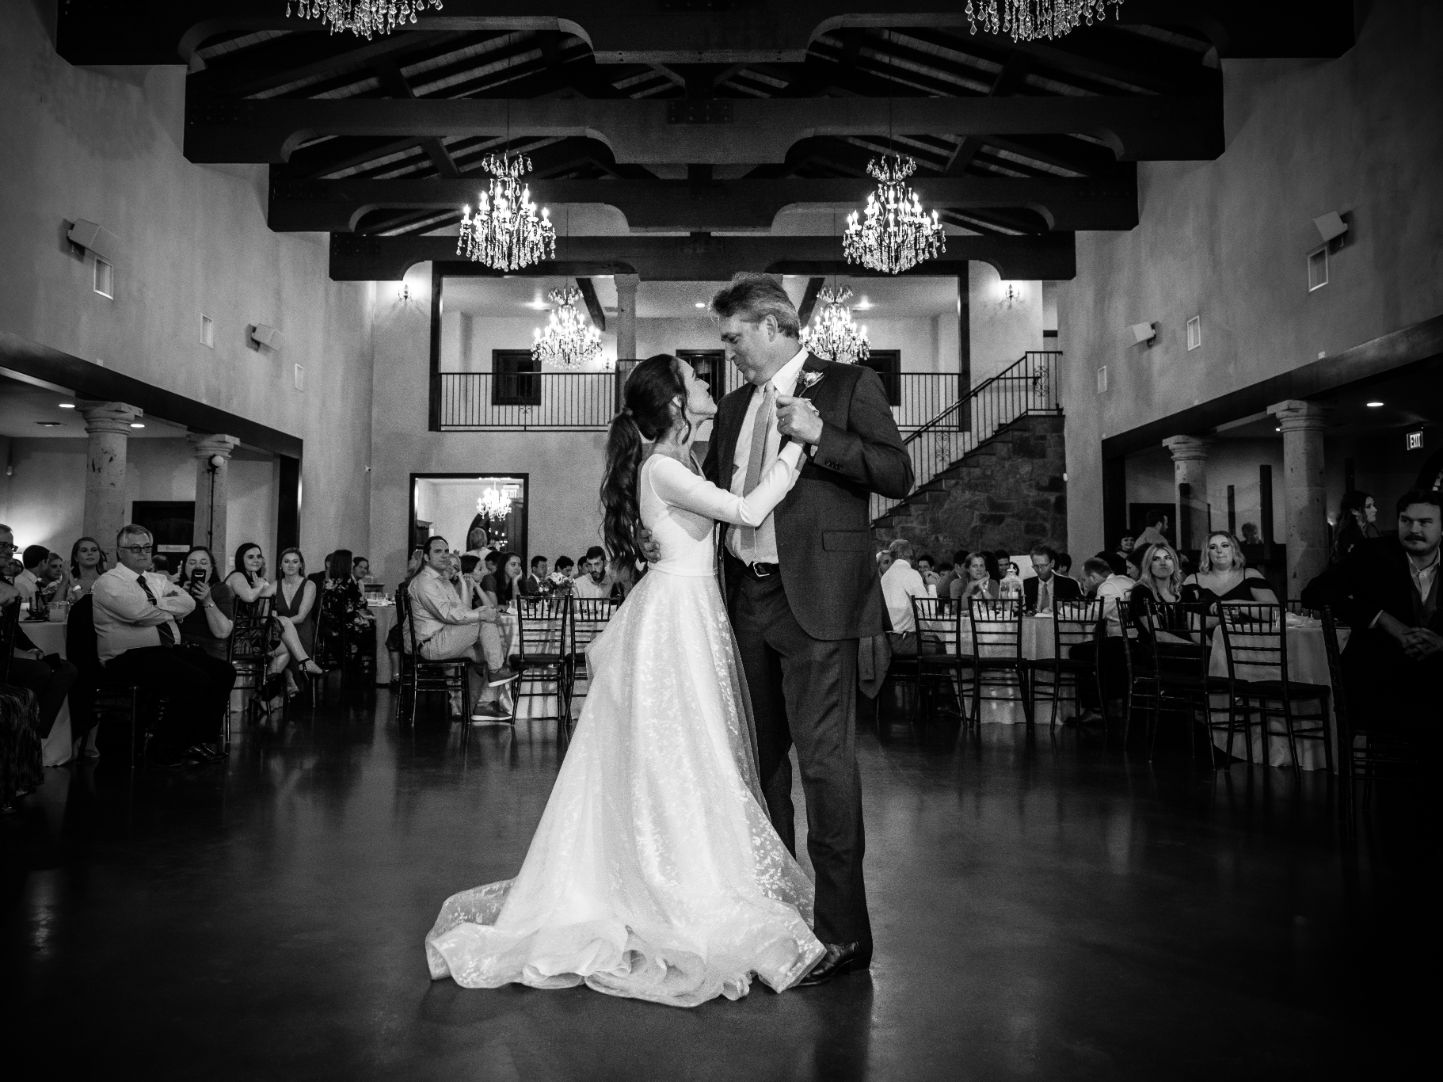 A bride dances with her father in a large banquet style hall. Wood beams on the ceiling with chandeliers. 